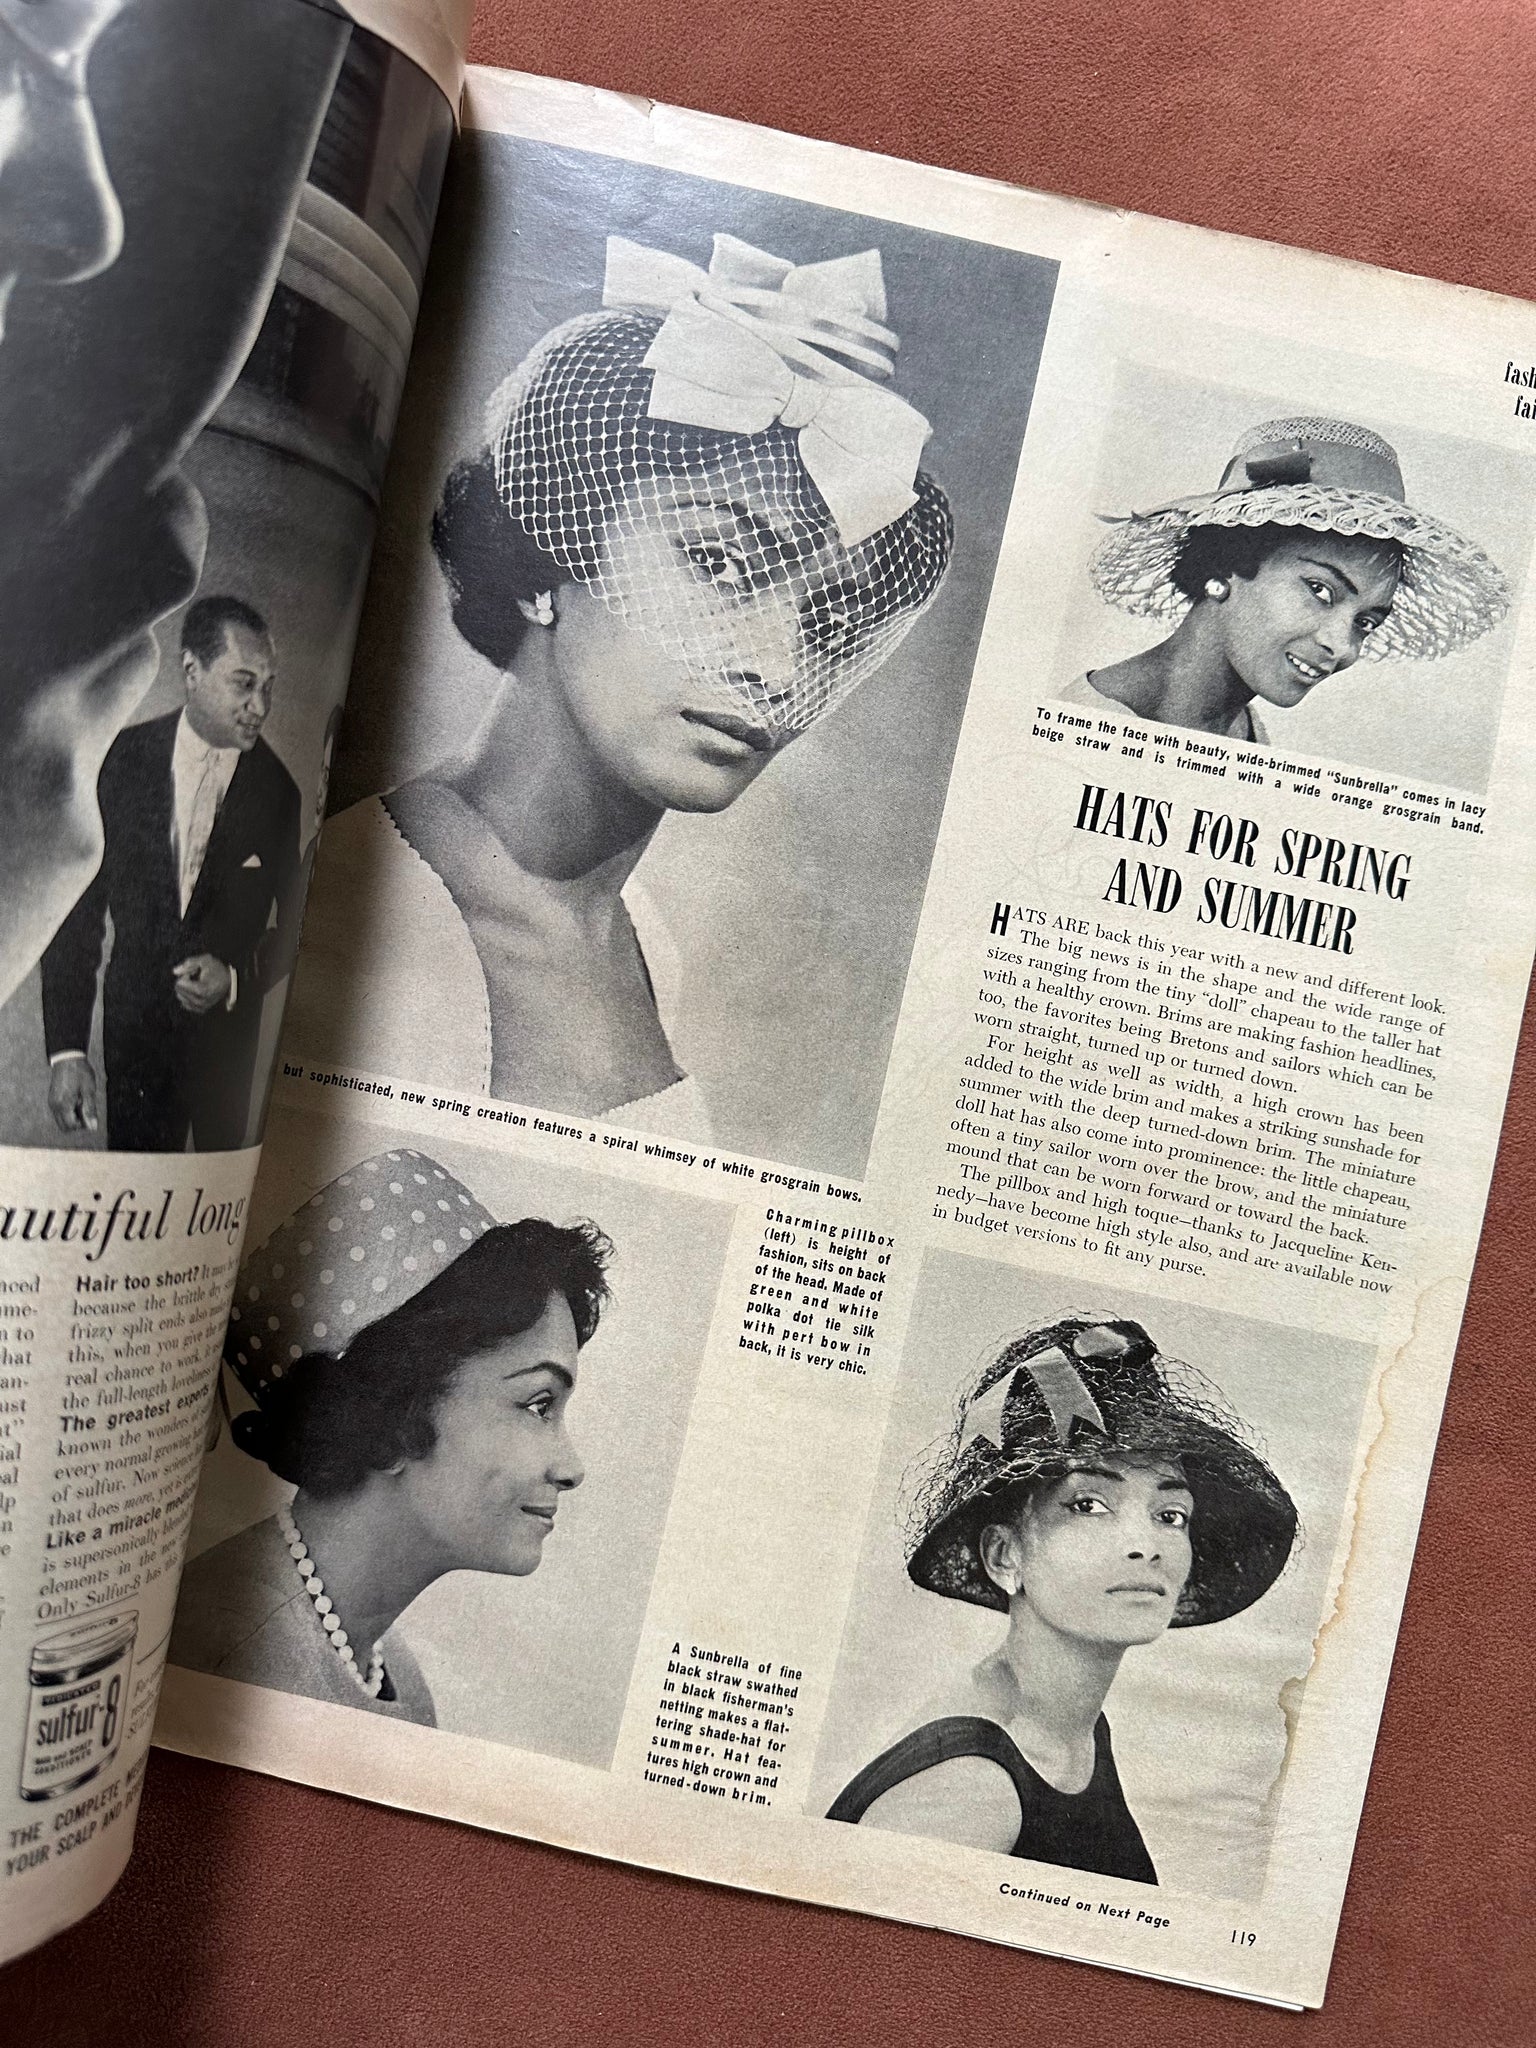 Vintage Ebony Magazine // "Hats for Spring and Summer" (May 1961)